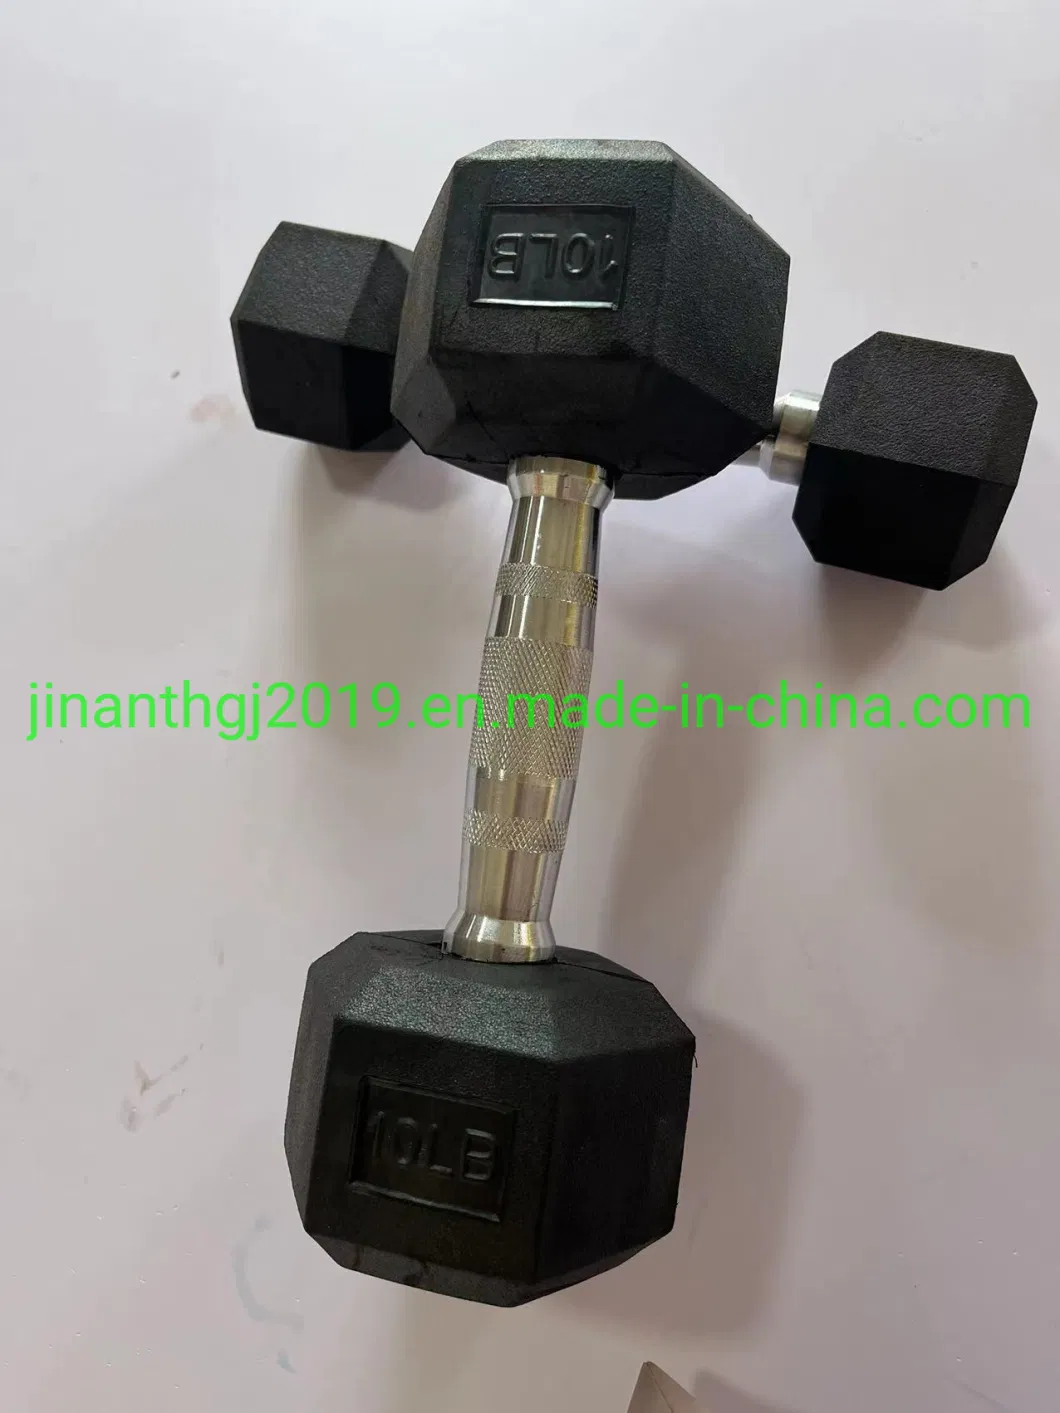 China Professional Exercise Gym or Fitness Use Dumbbell